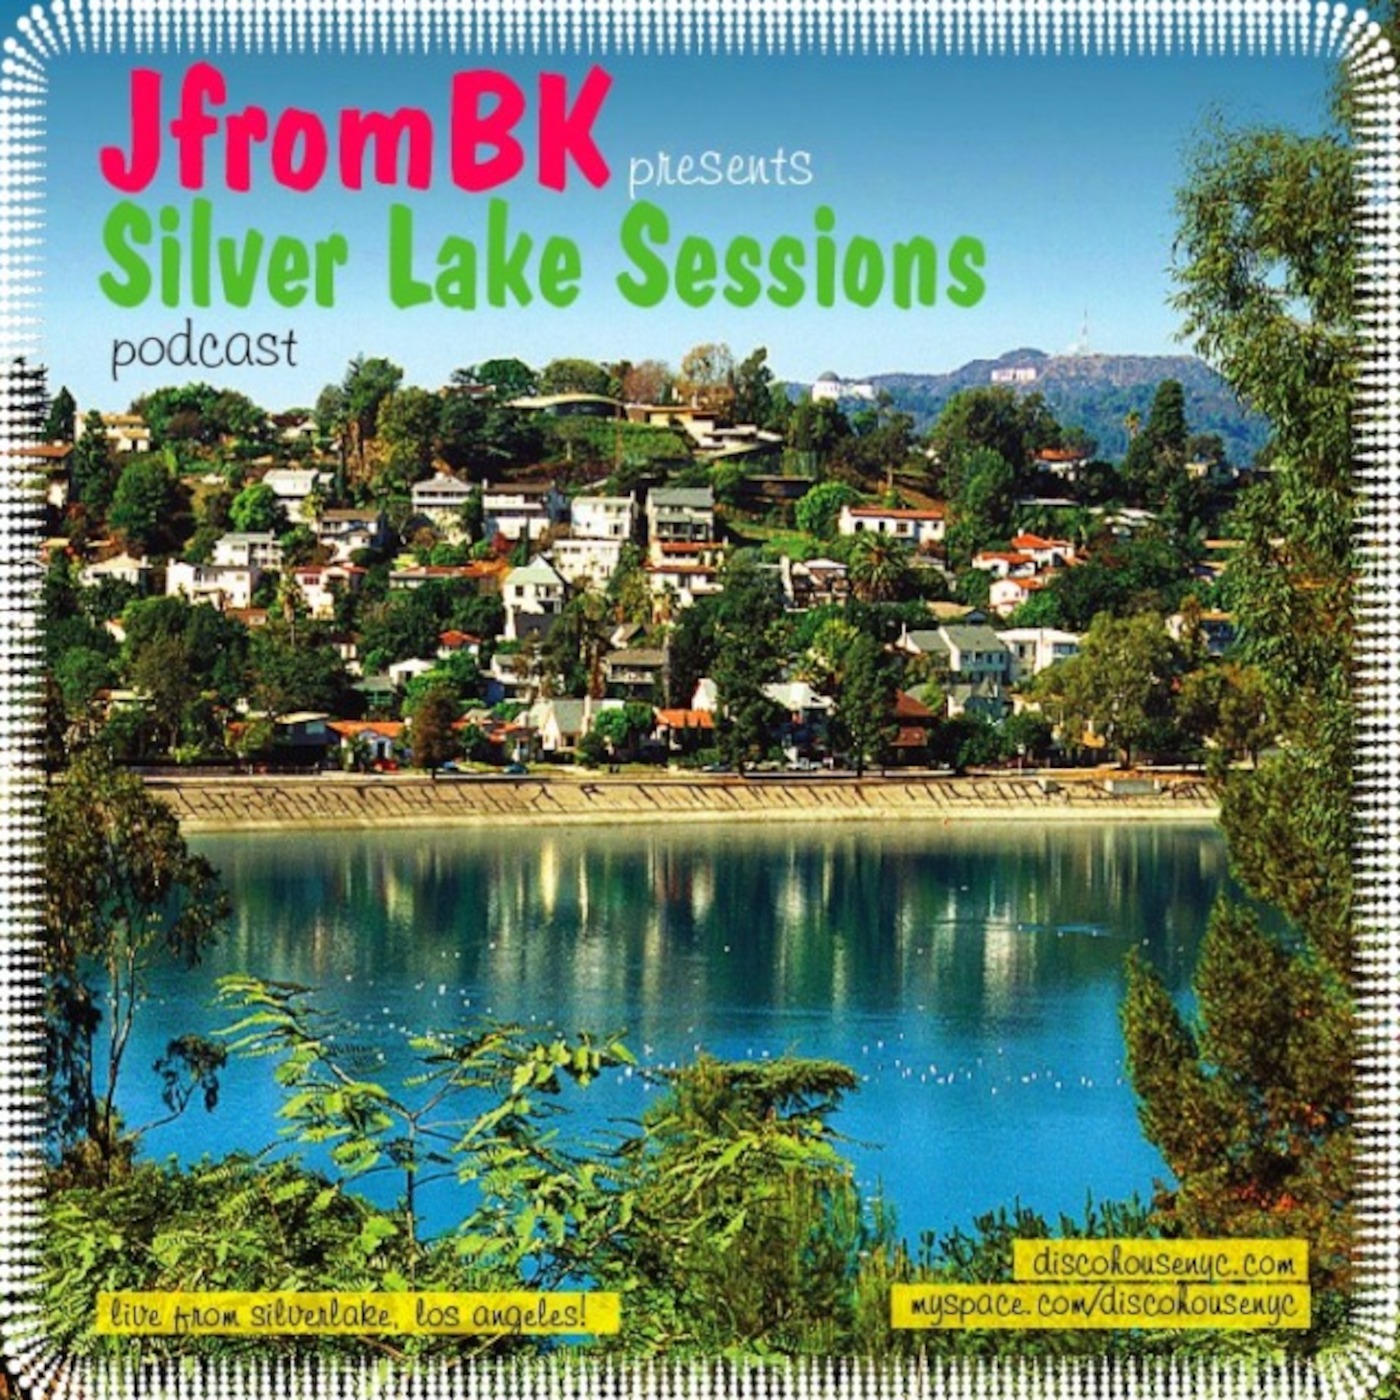 The Silver Lake Sessions